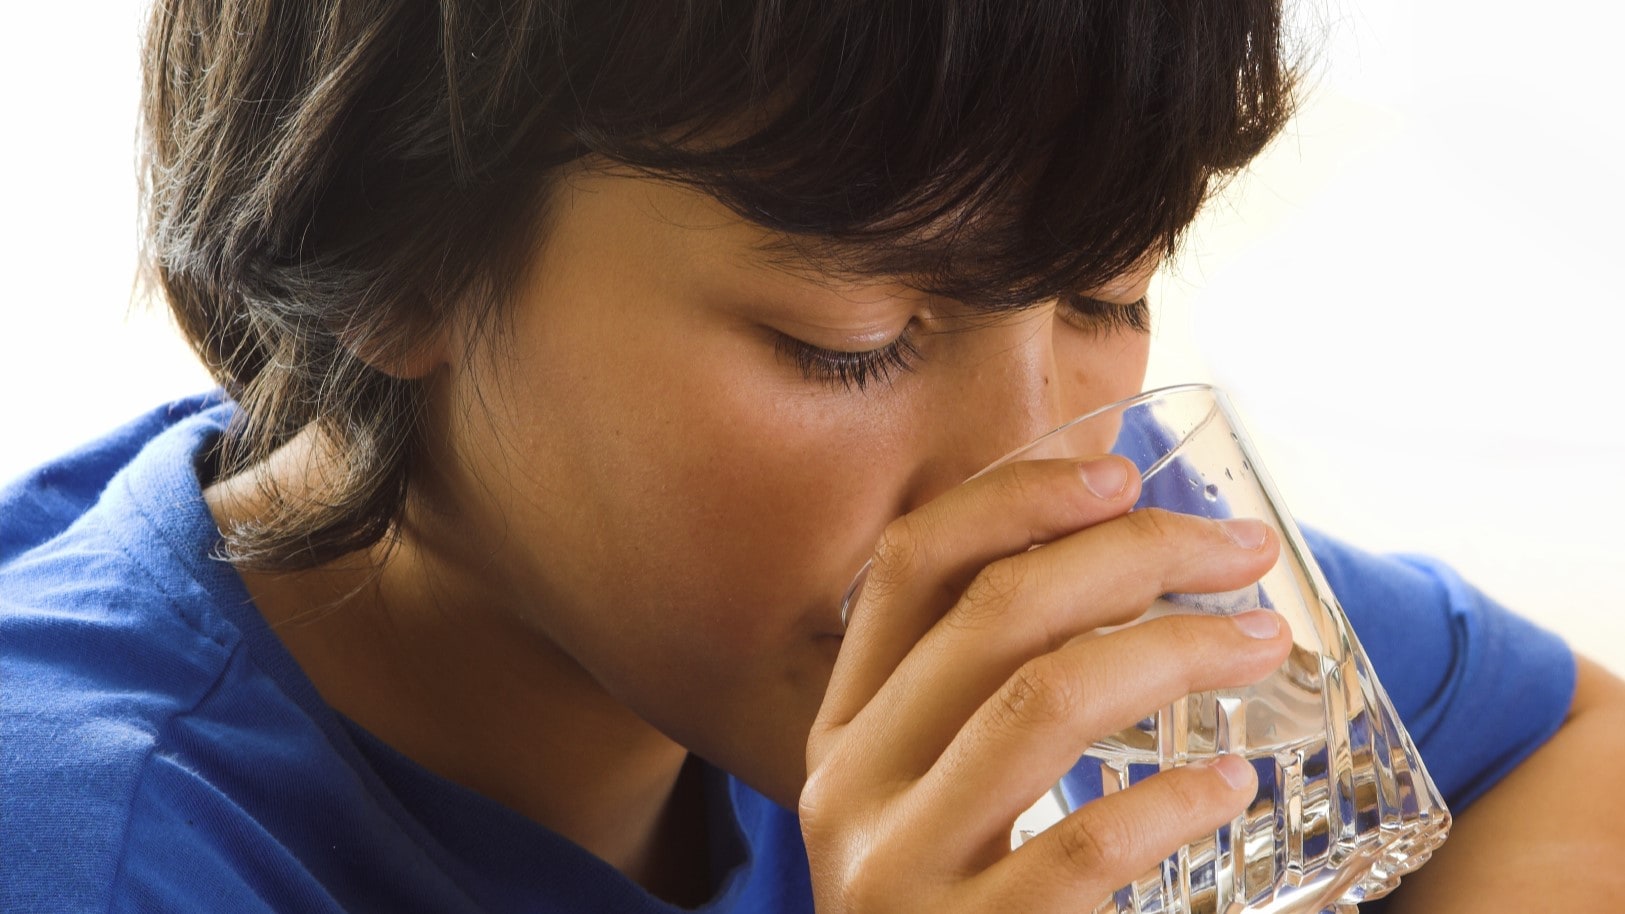 Young boy drinking a glass of water.